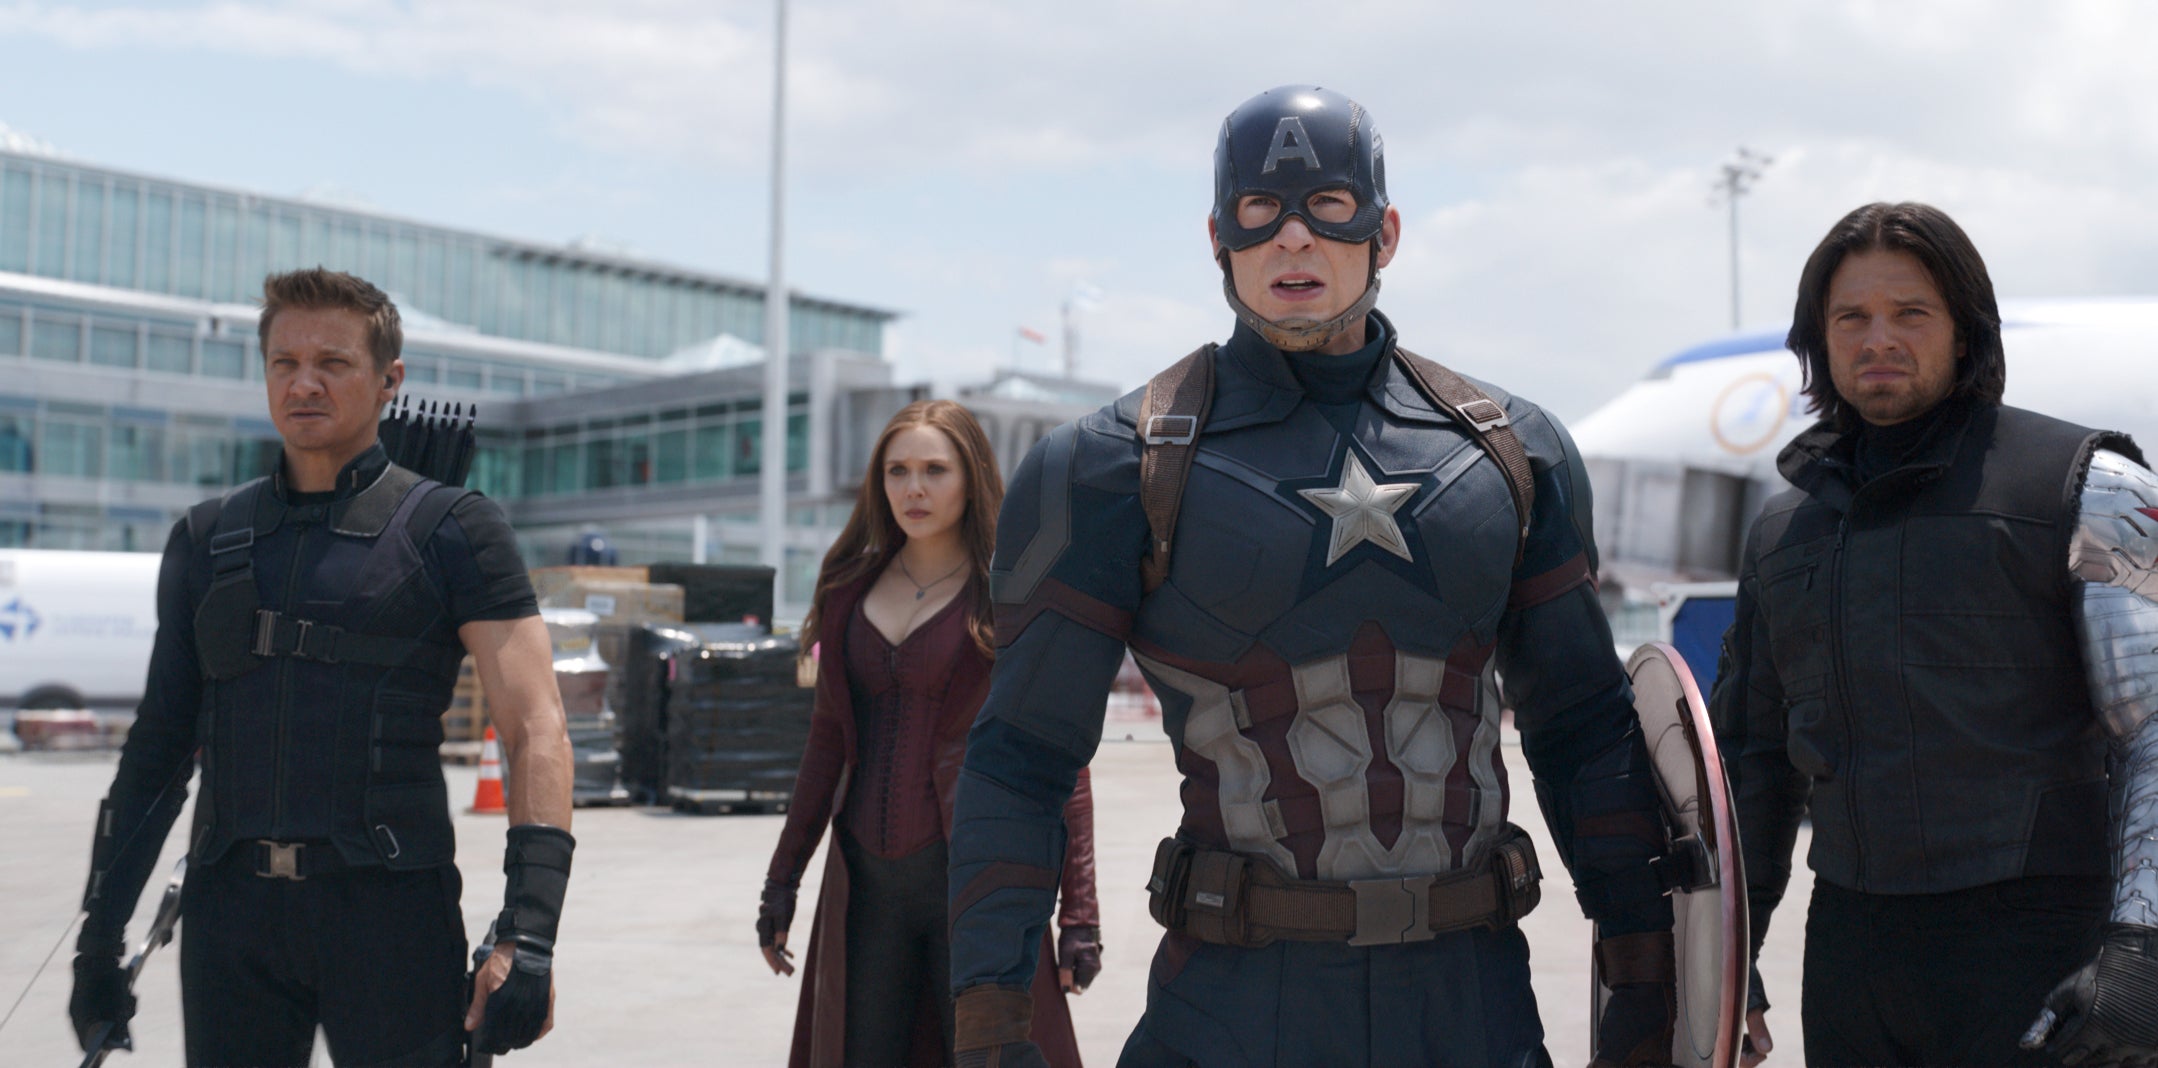 Captain America: Civil War' gets everything right that 'Batman v Superman'  gets wrong